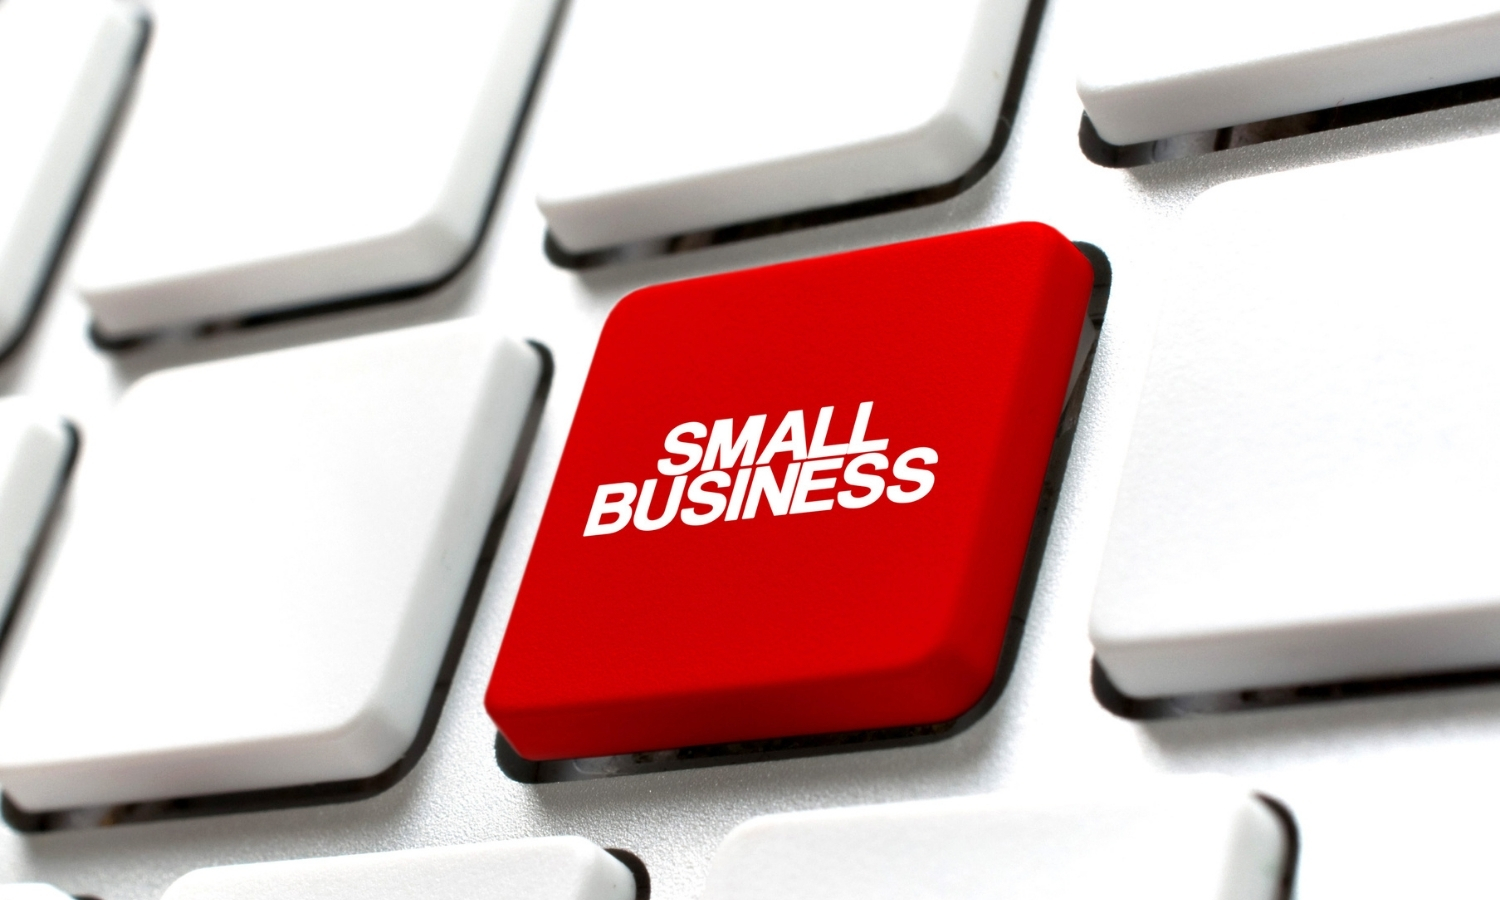 Small businesses are not too small for an ERP solution